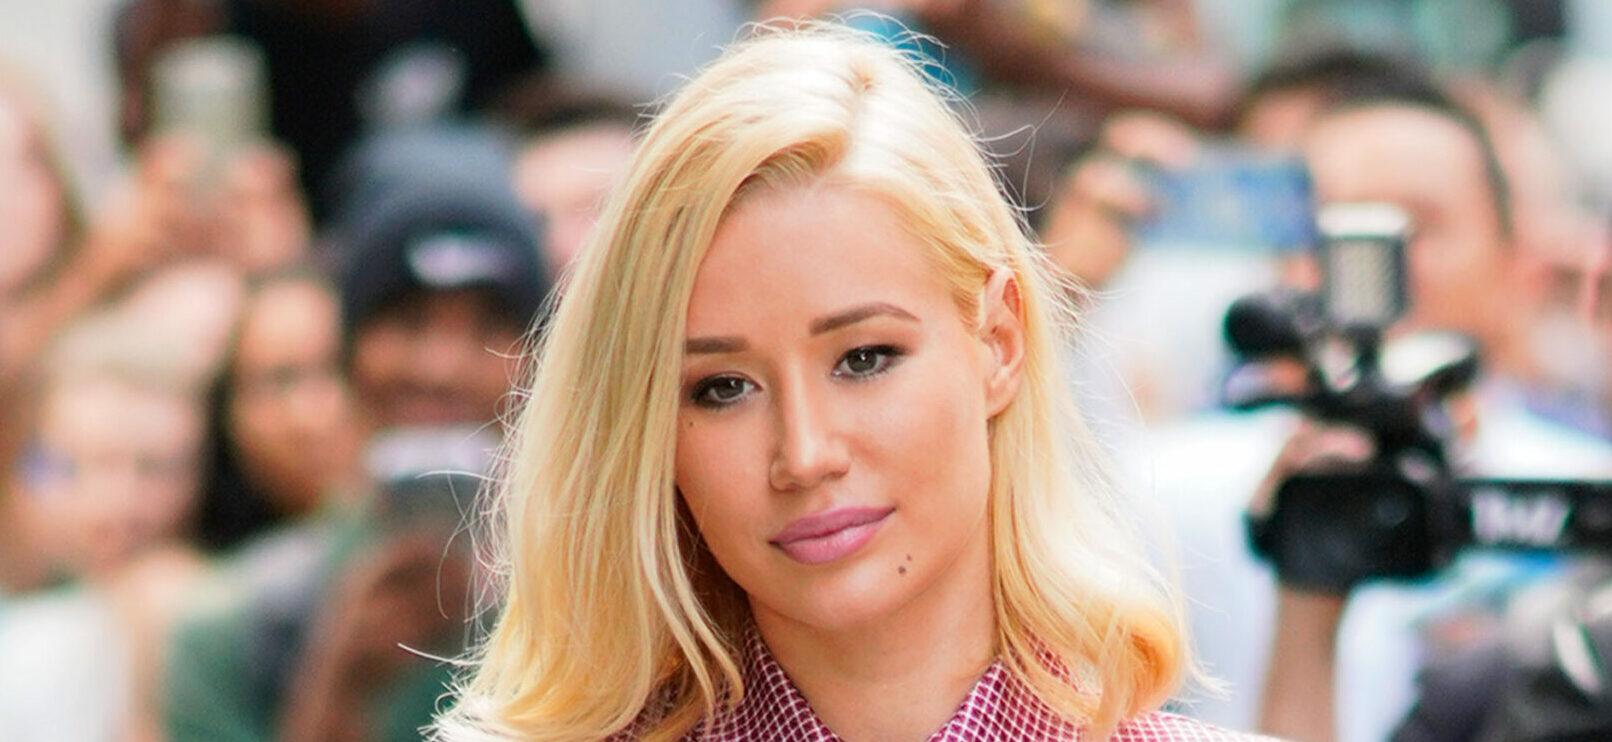 Iggy Azalea Teases Fans With Racy Mirror Clip After News Of Upcoming Project